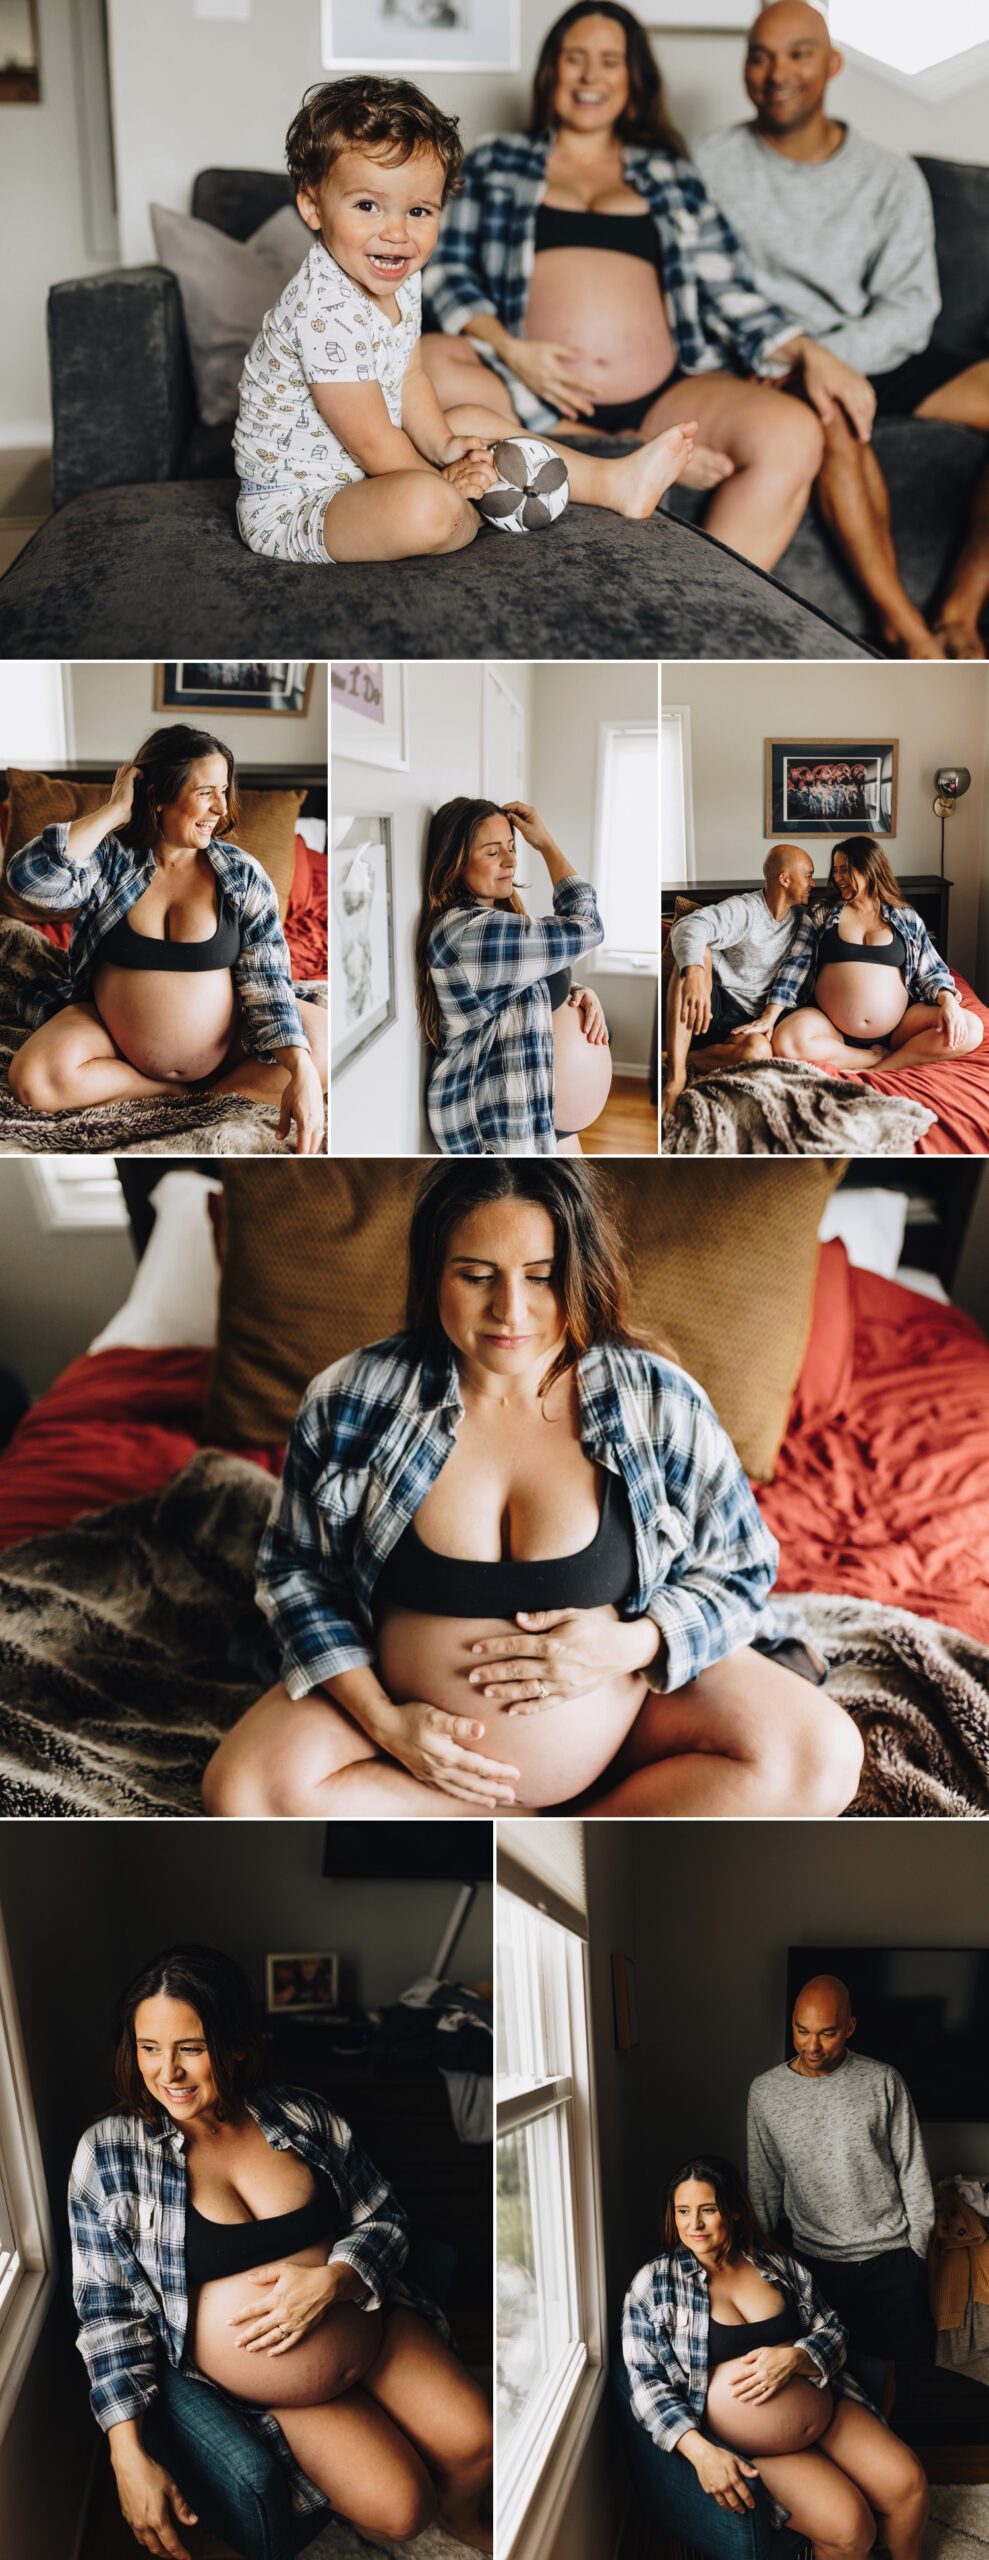 East Bay In-Home Intimate Maternity Photo Session